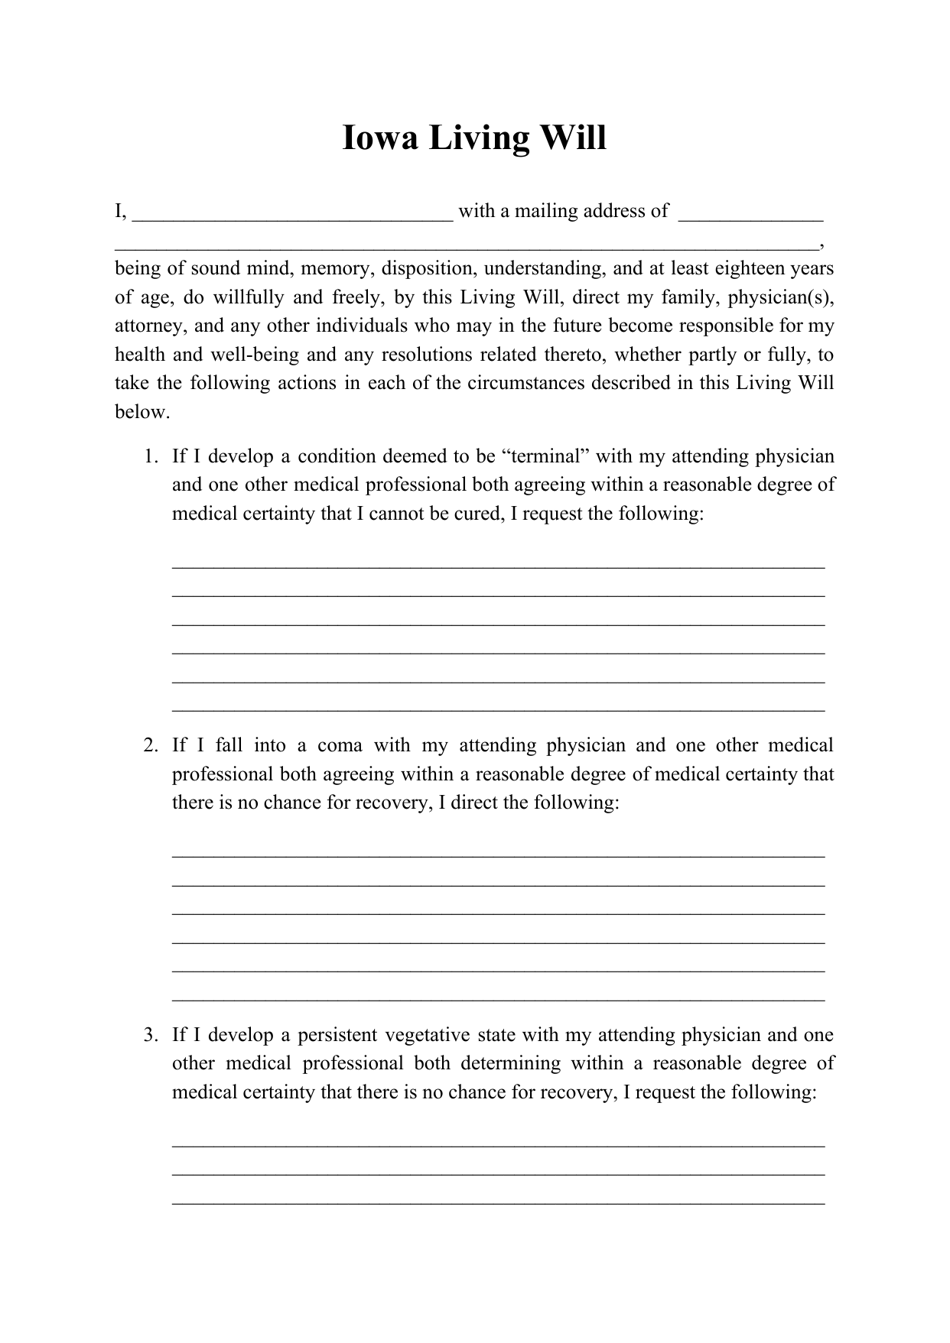 iowa-living-will-form-fill-out-sign-online-and-download-pdf